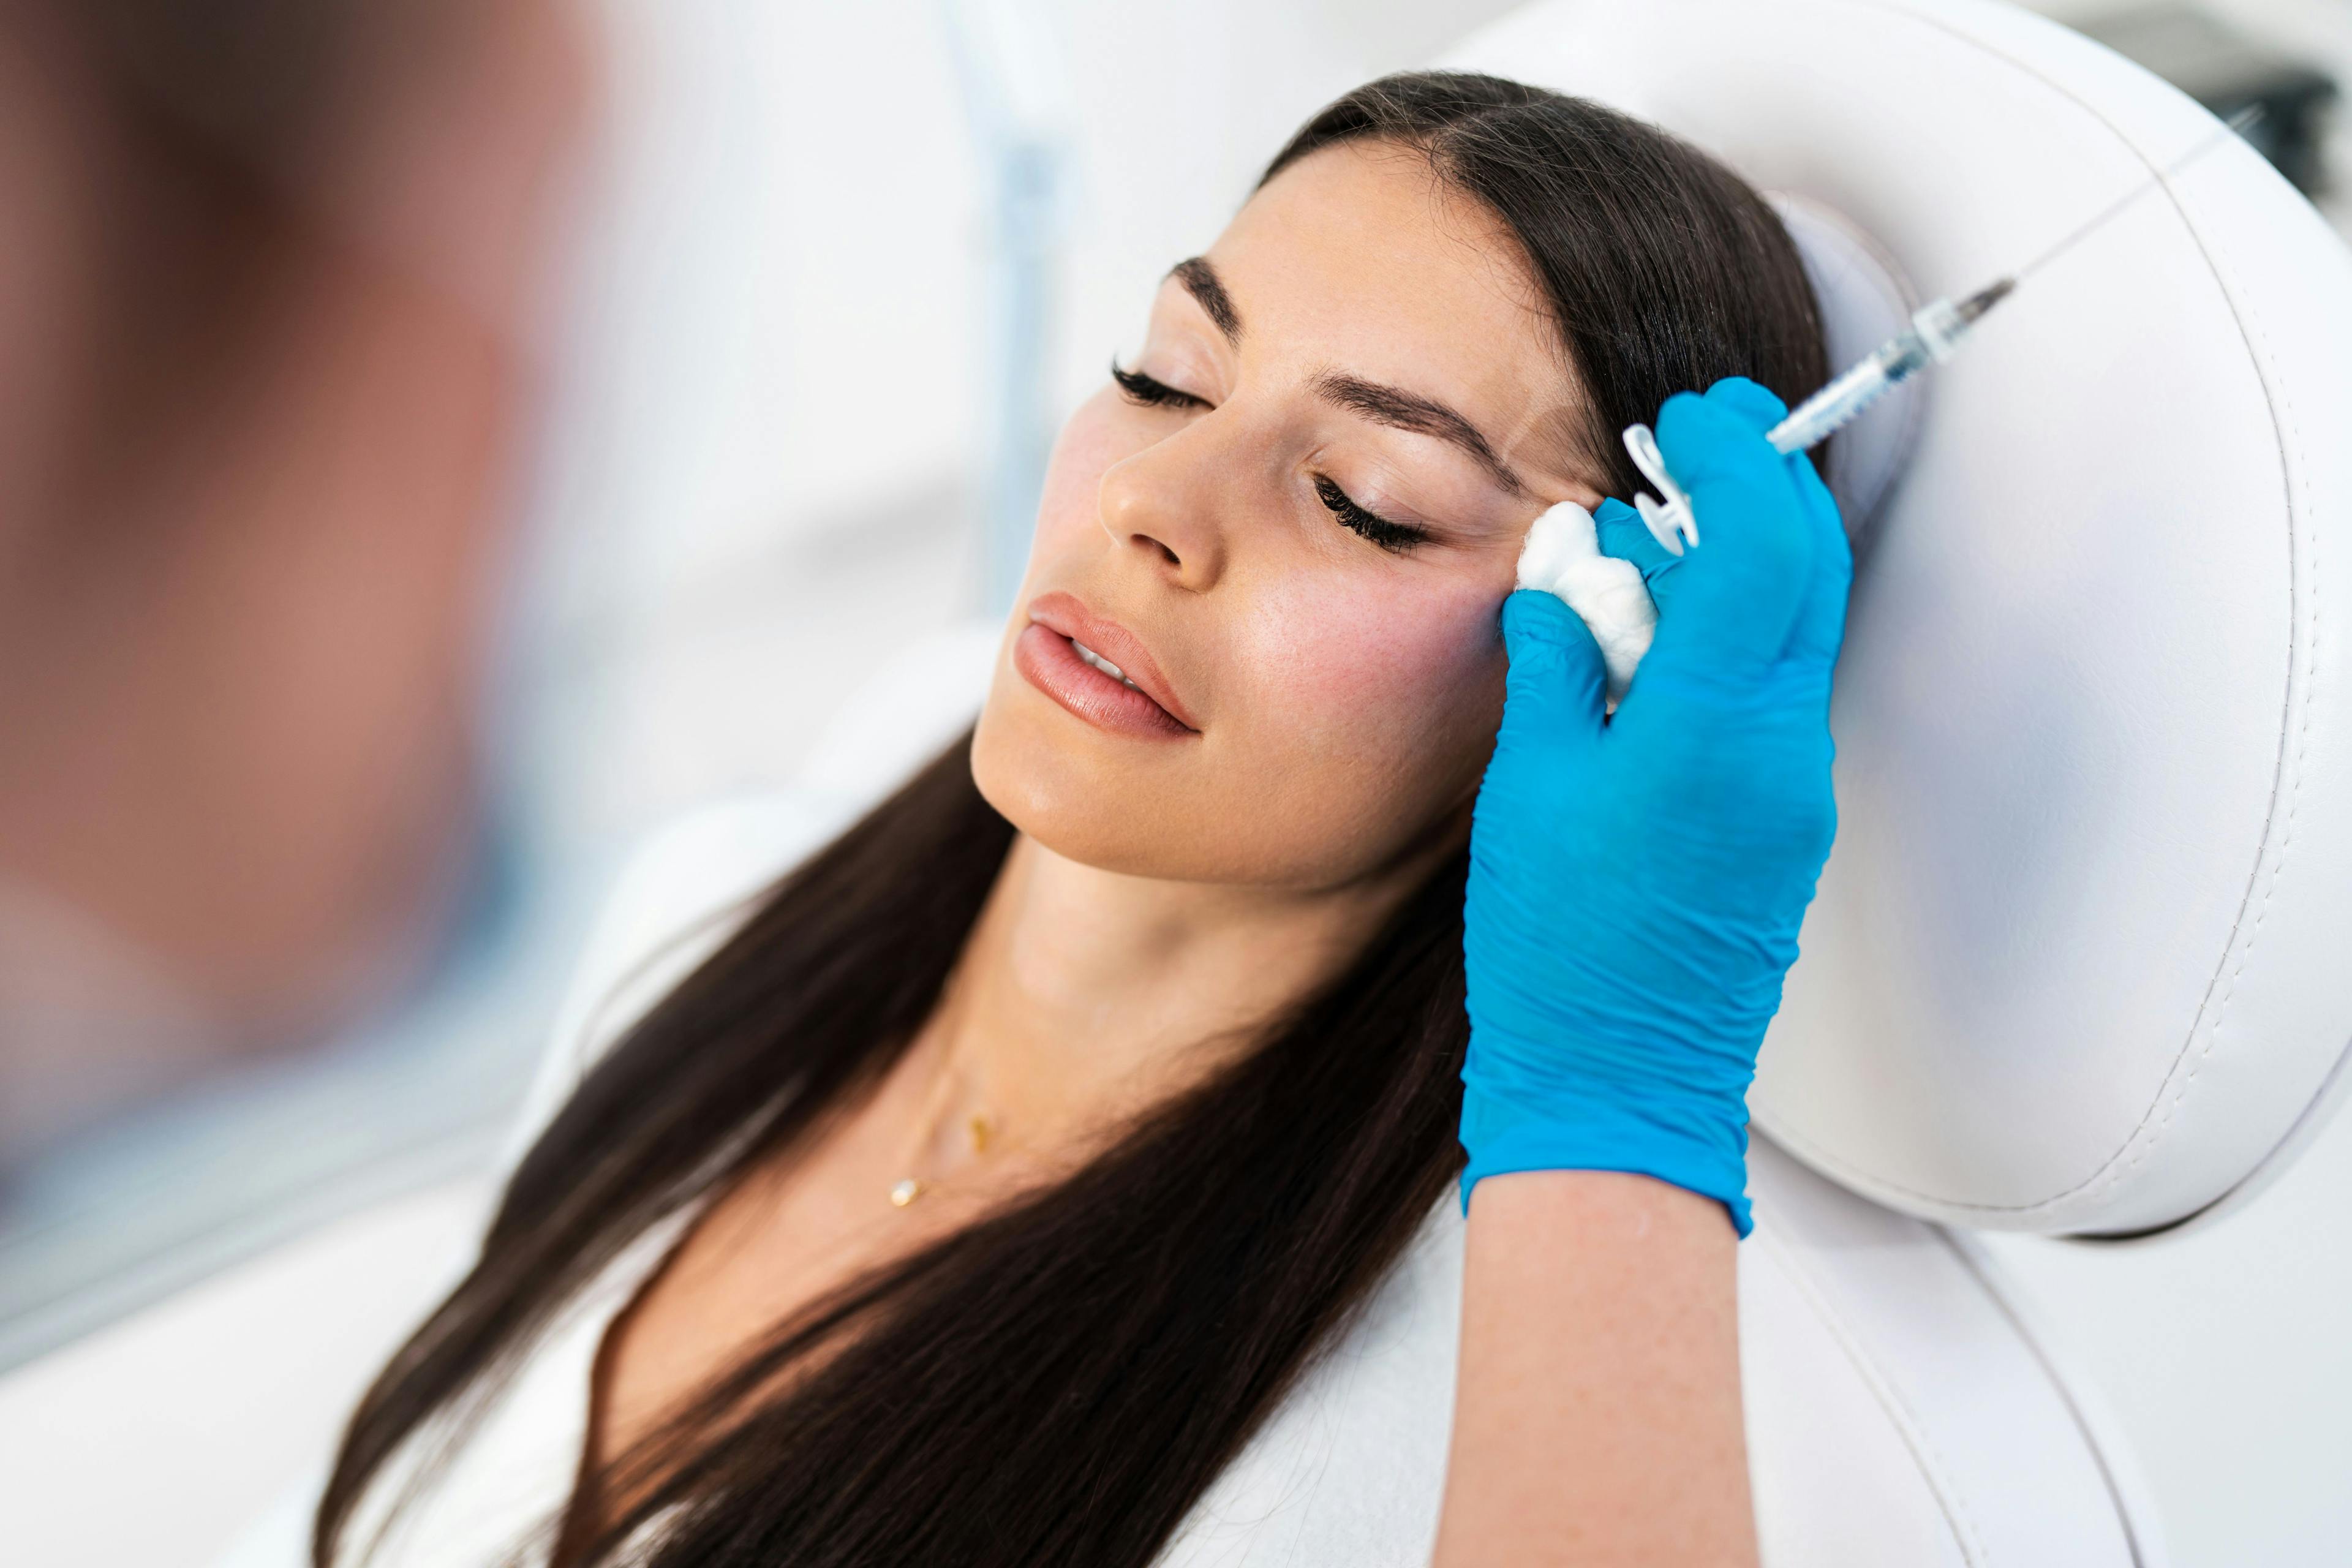 Superficial and Deep Midfacial Injections Offer Significant Results